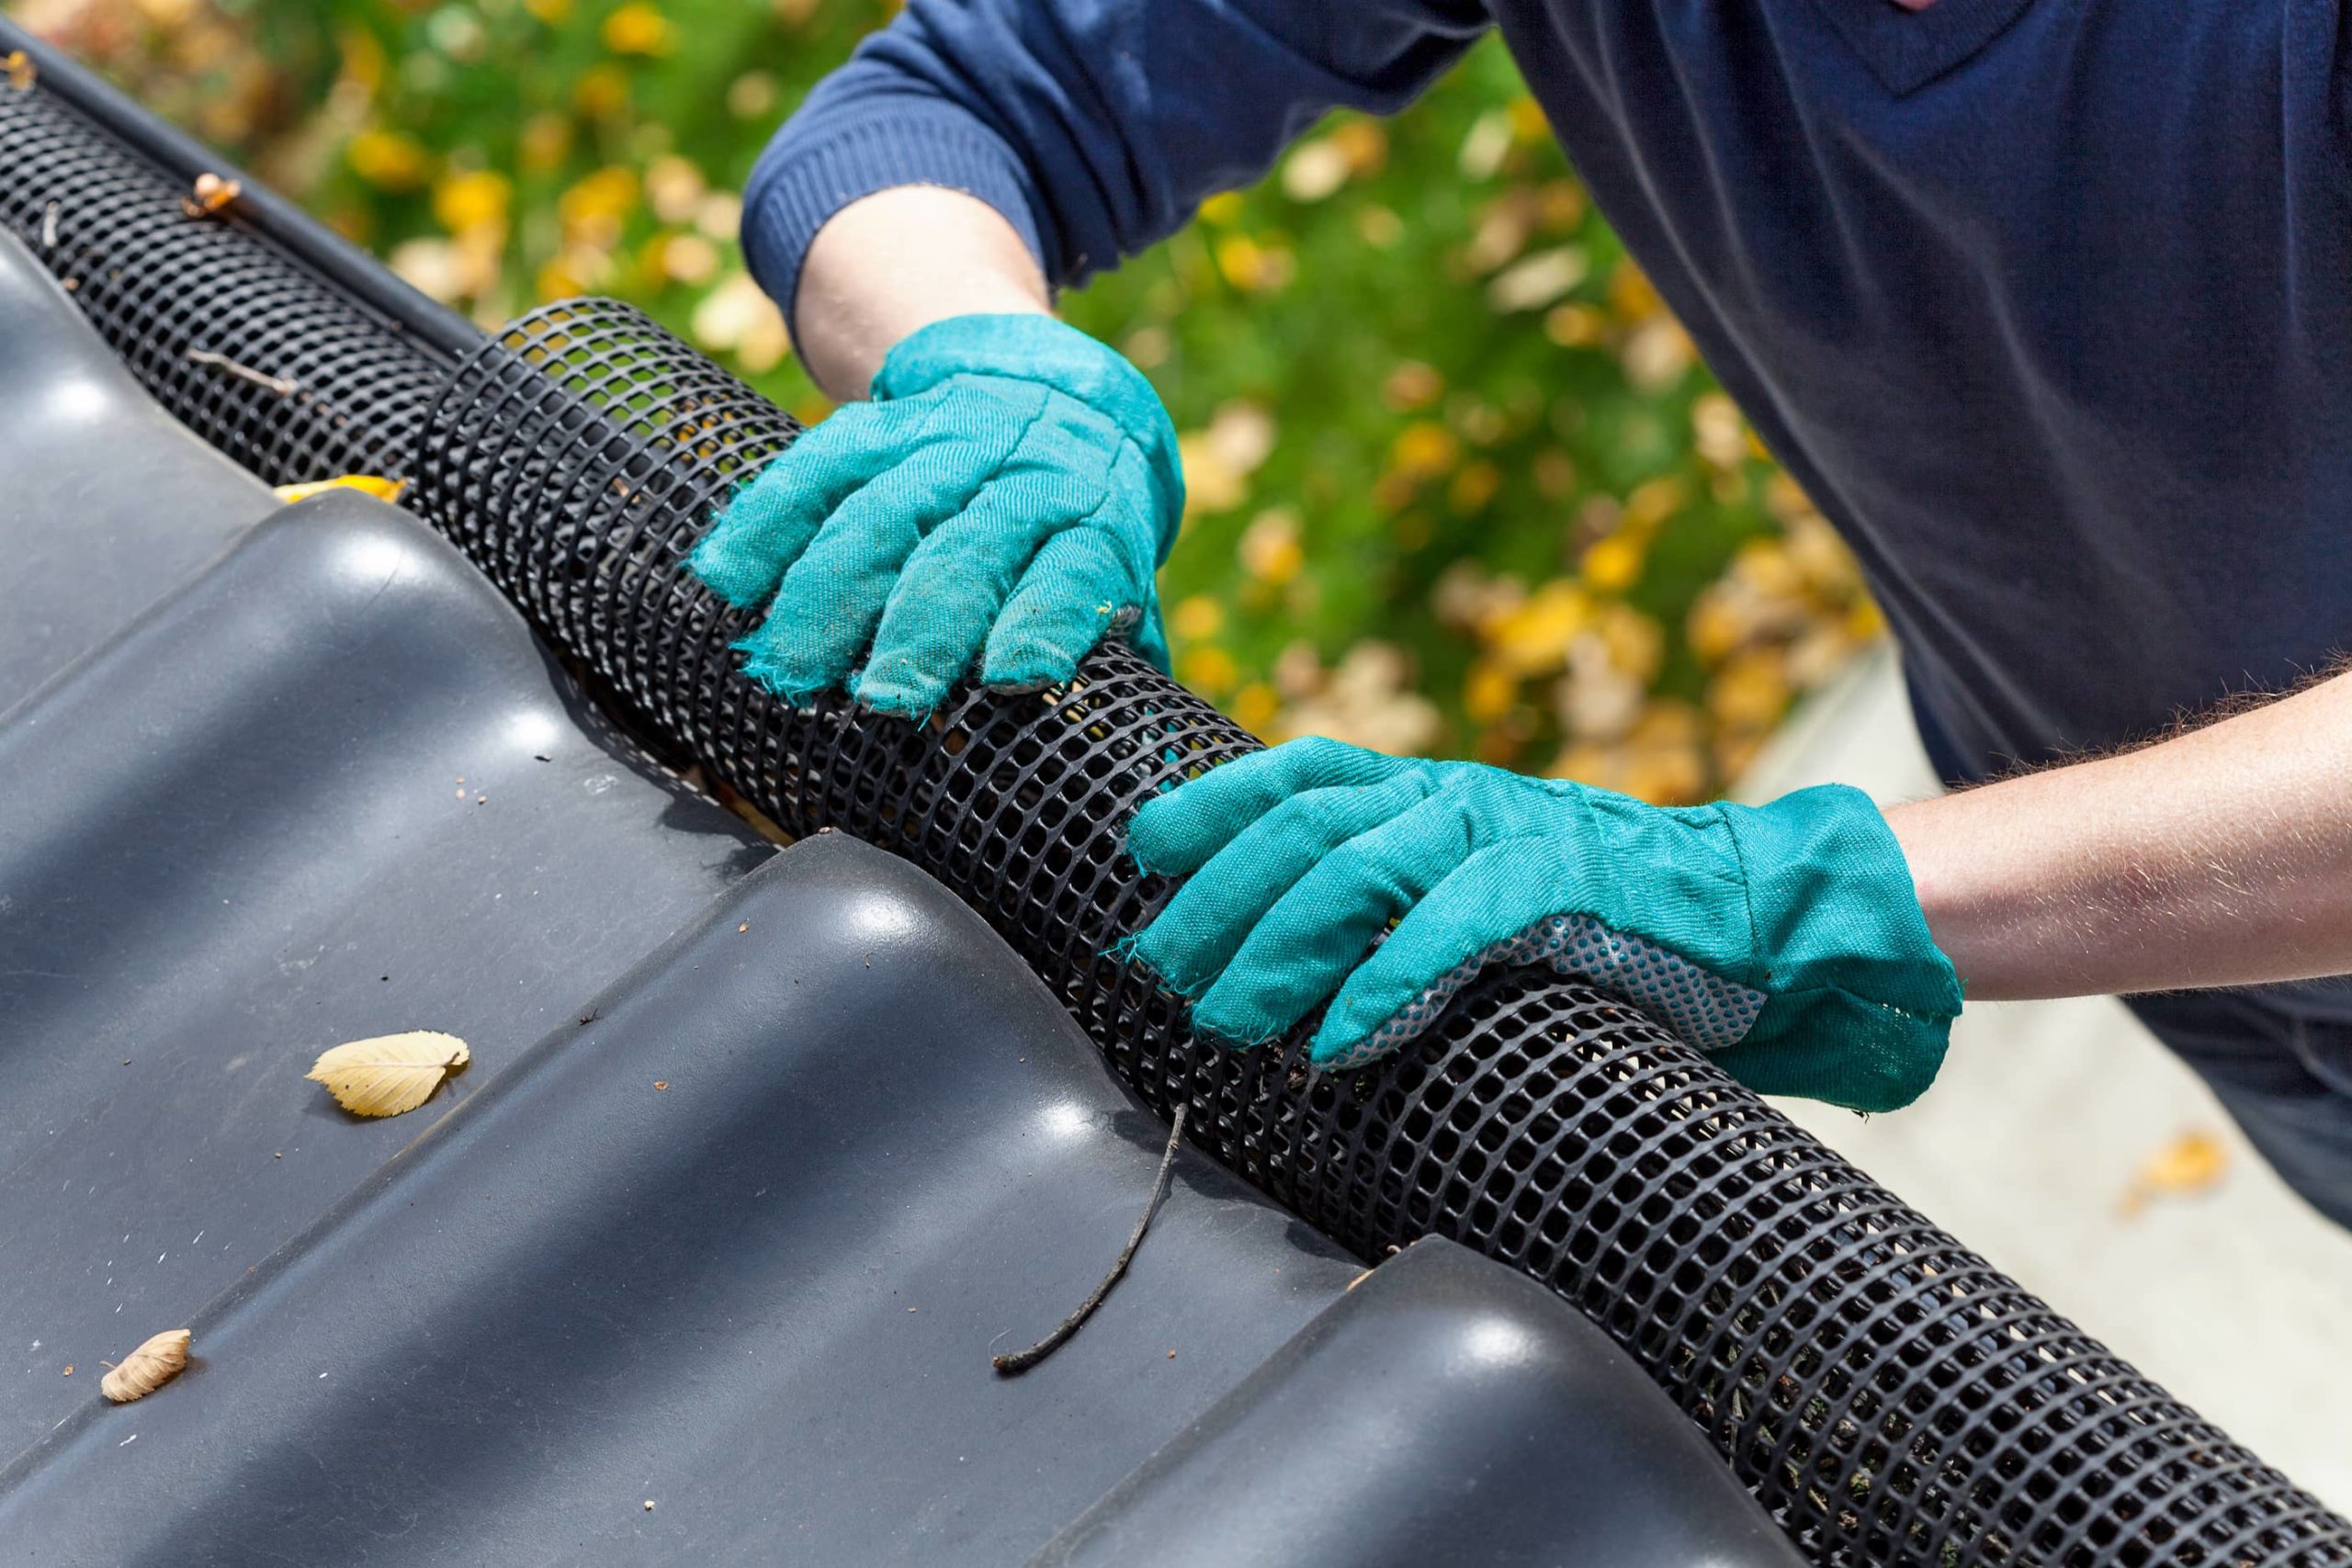 This is an image of a roofing contractor installing a gutter guard to prevent debris clogging.